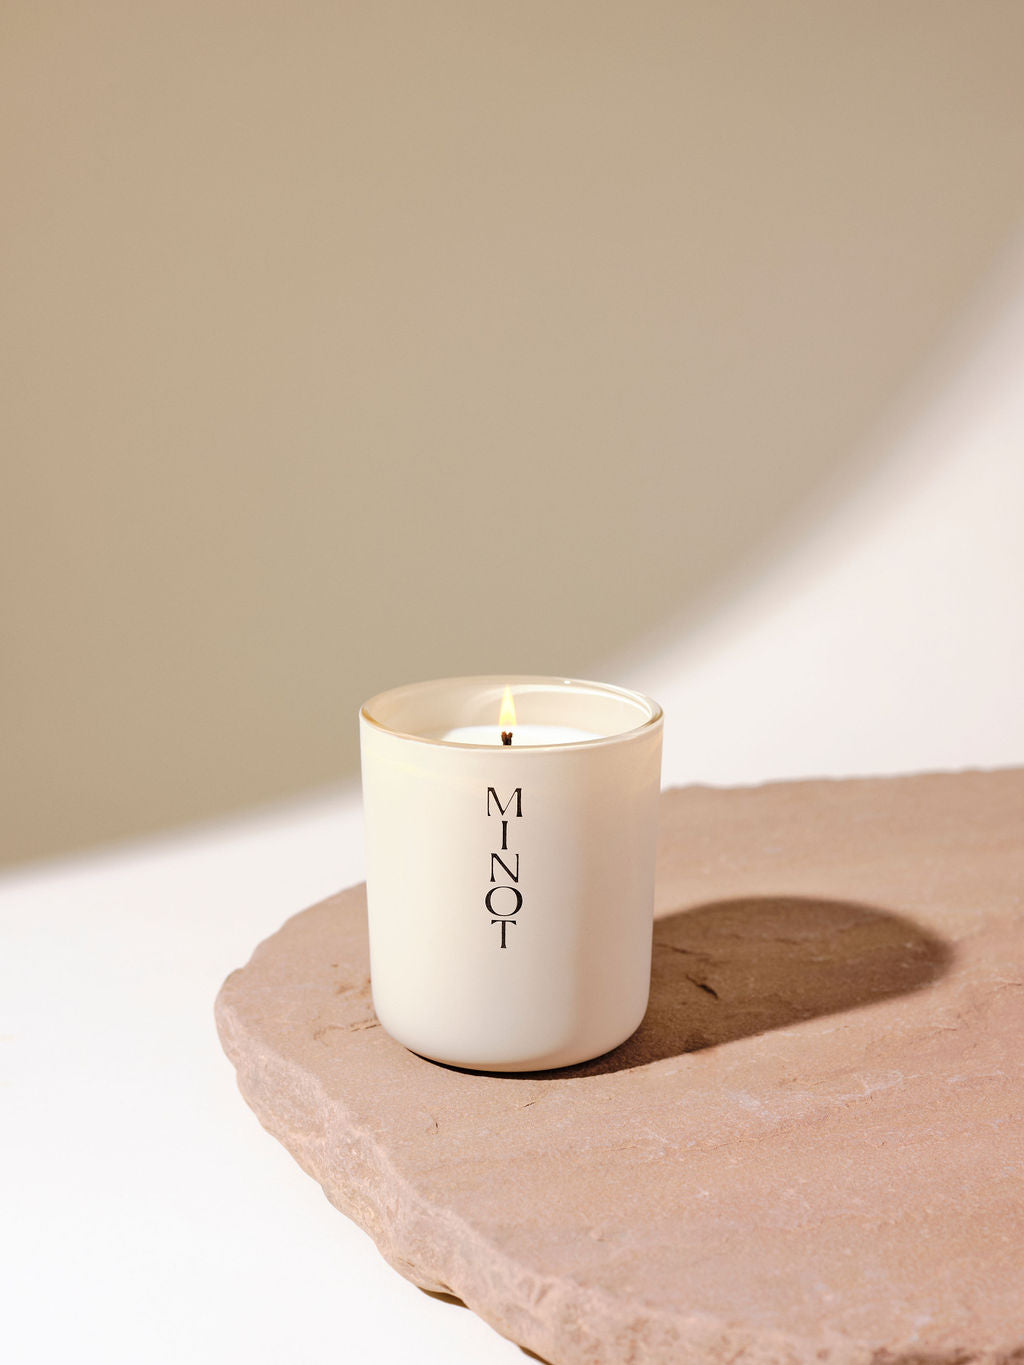 Daybreak is a rose-scented candle with smoky notes of oud and amber in a minimalist glass vessel